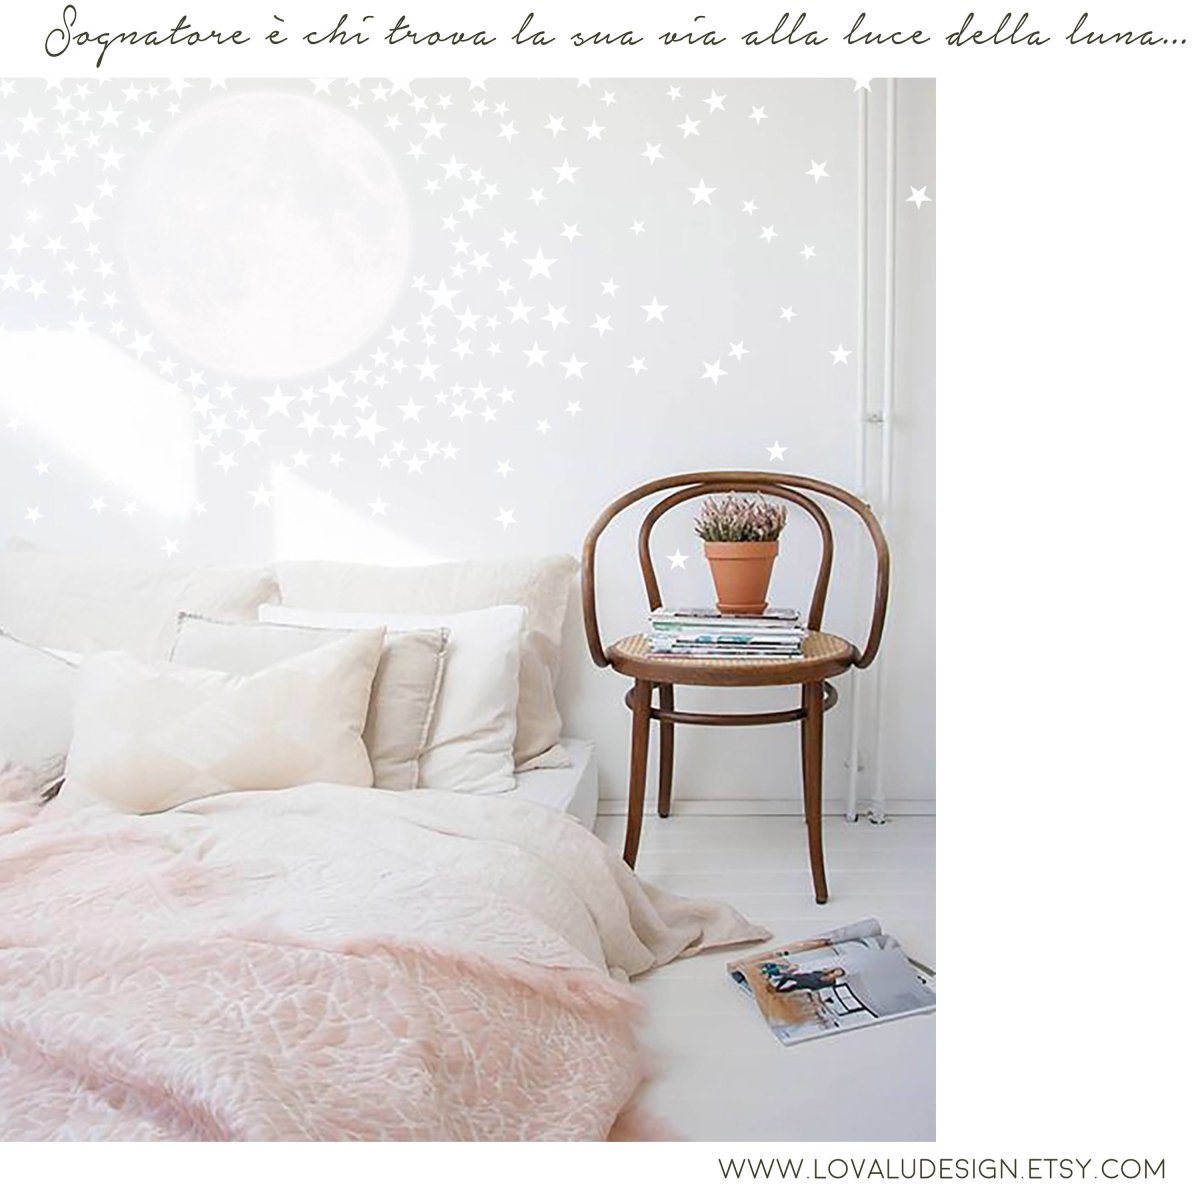 Moon with 300 Stars Wall Decal Peel & Stick - Lovalù